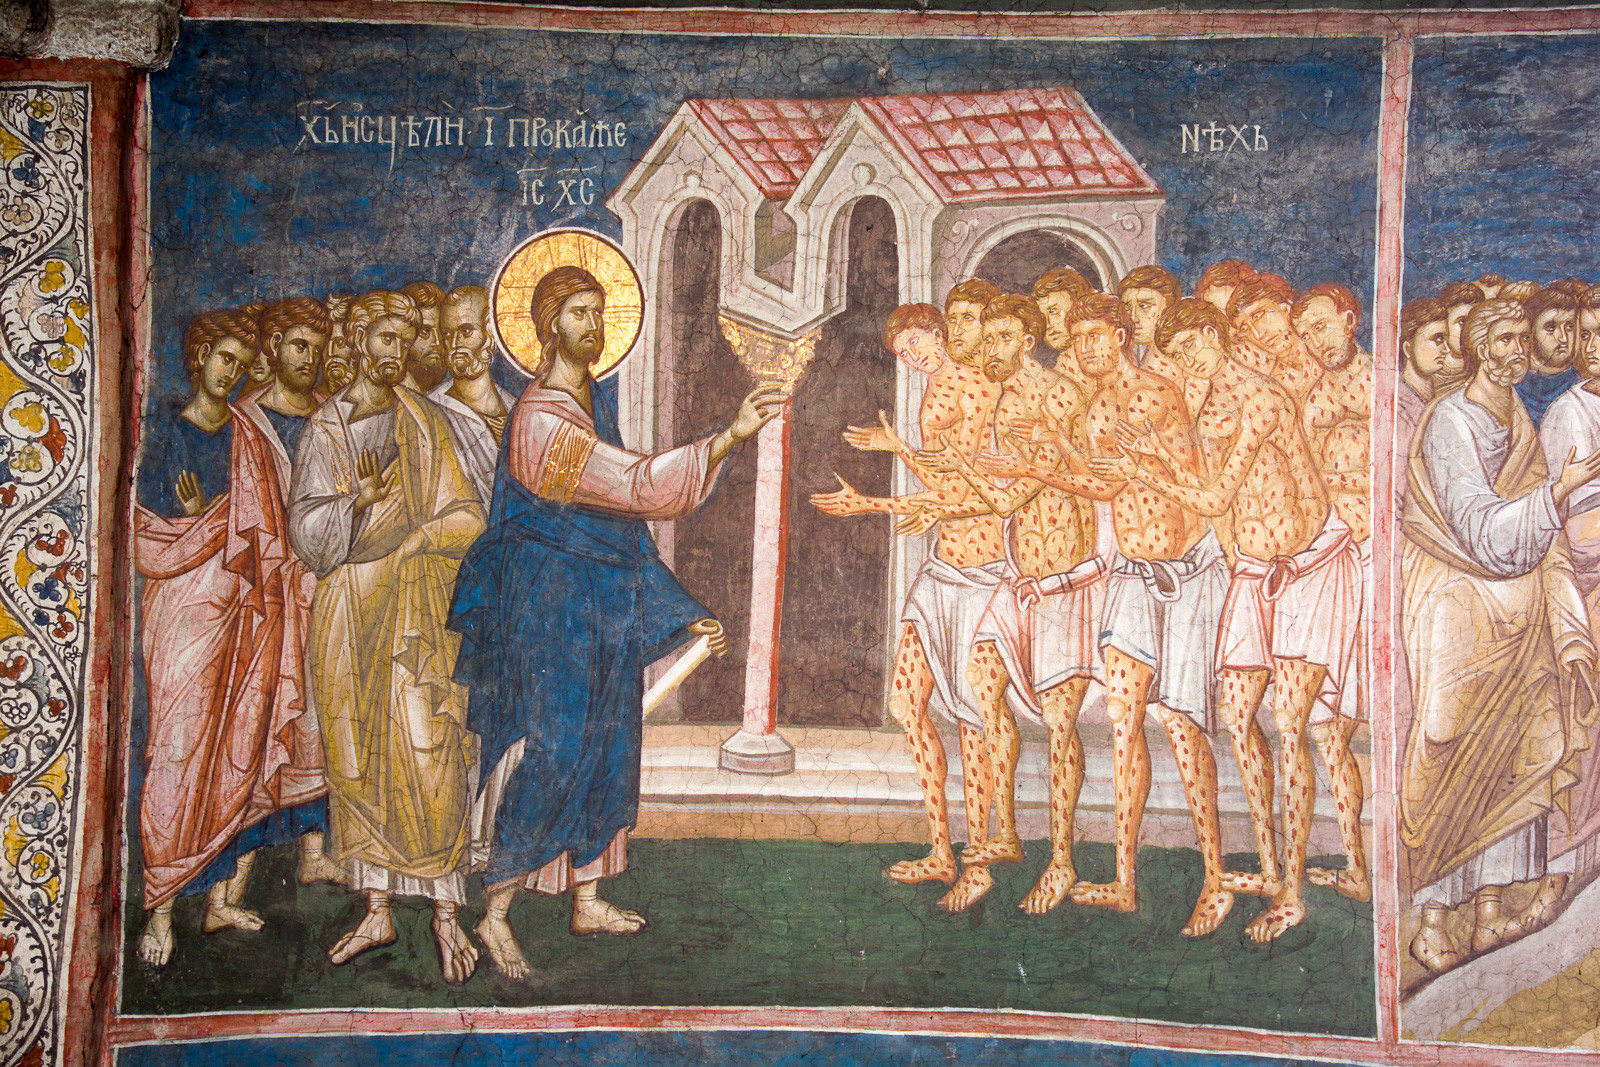 Jesus healing ten lepers, the evangelical reading for Trinitatis XIV. 14th century fresco from the Serbian Orthodox monastery of Visoki Decani, located south of the city of Peć, Kosovo.